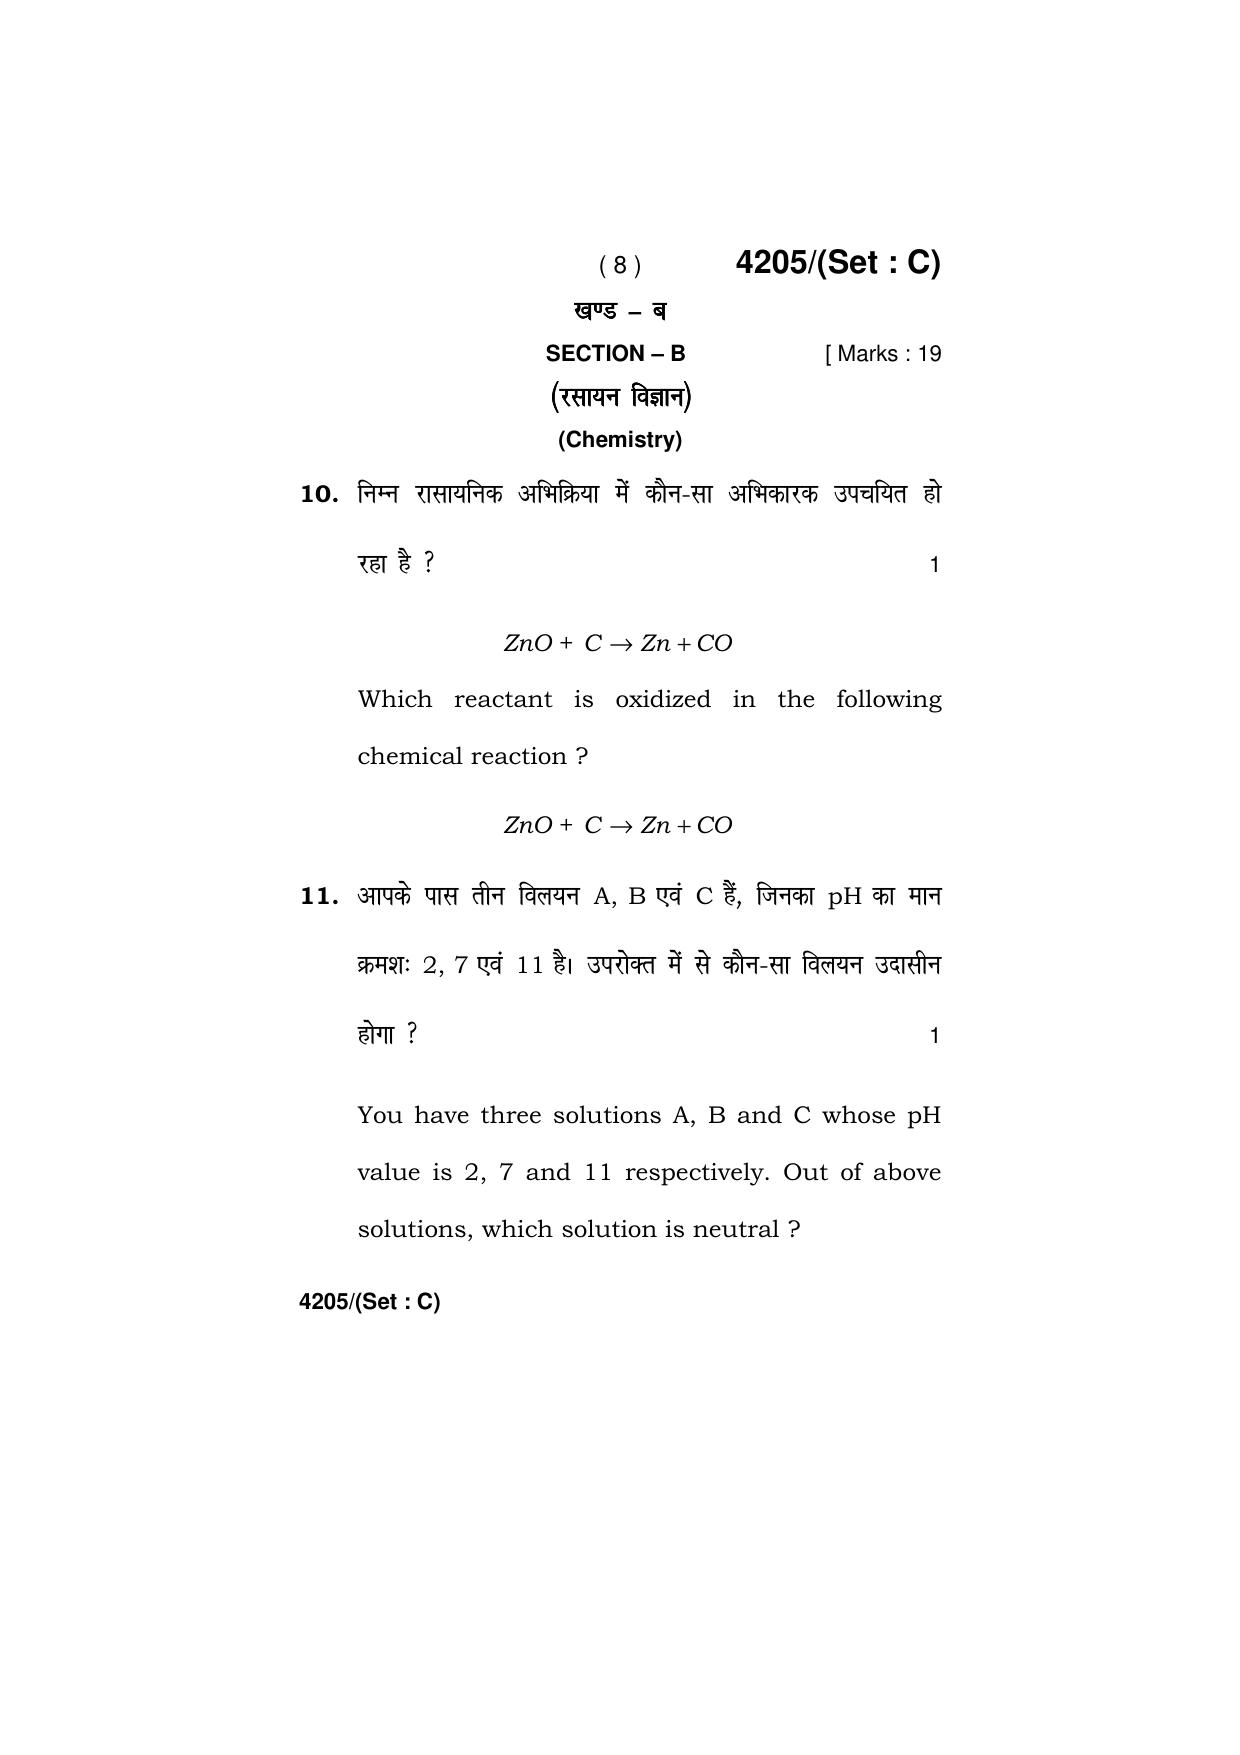 Haryana Board HBSE Class 10 Science (All Set) 2019 Question Paper - Page 40